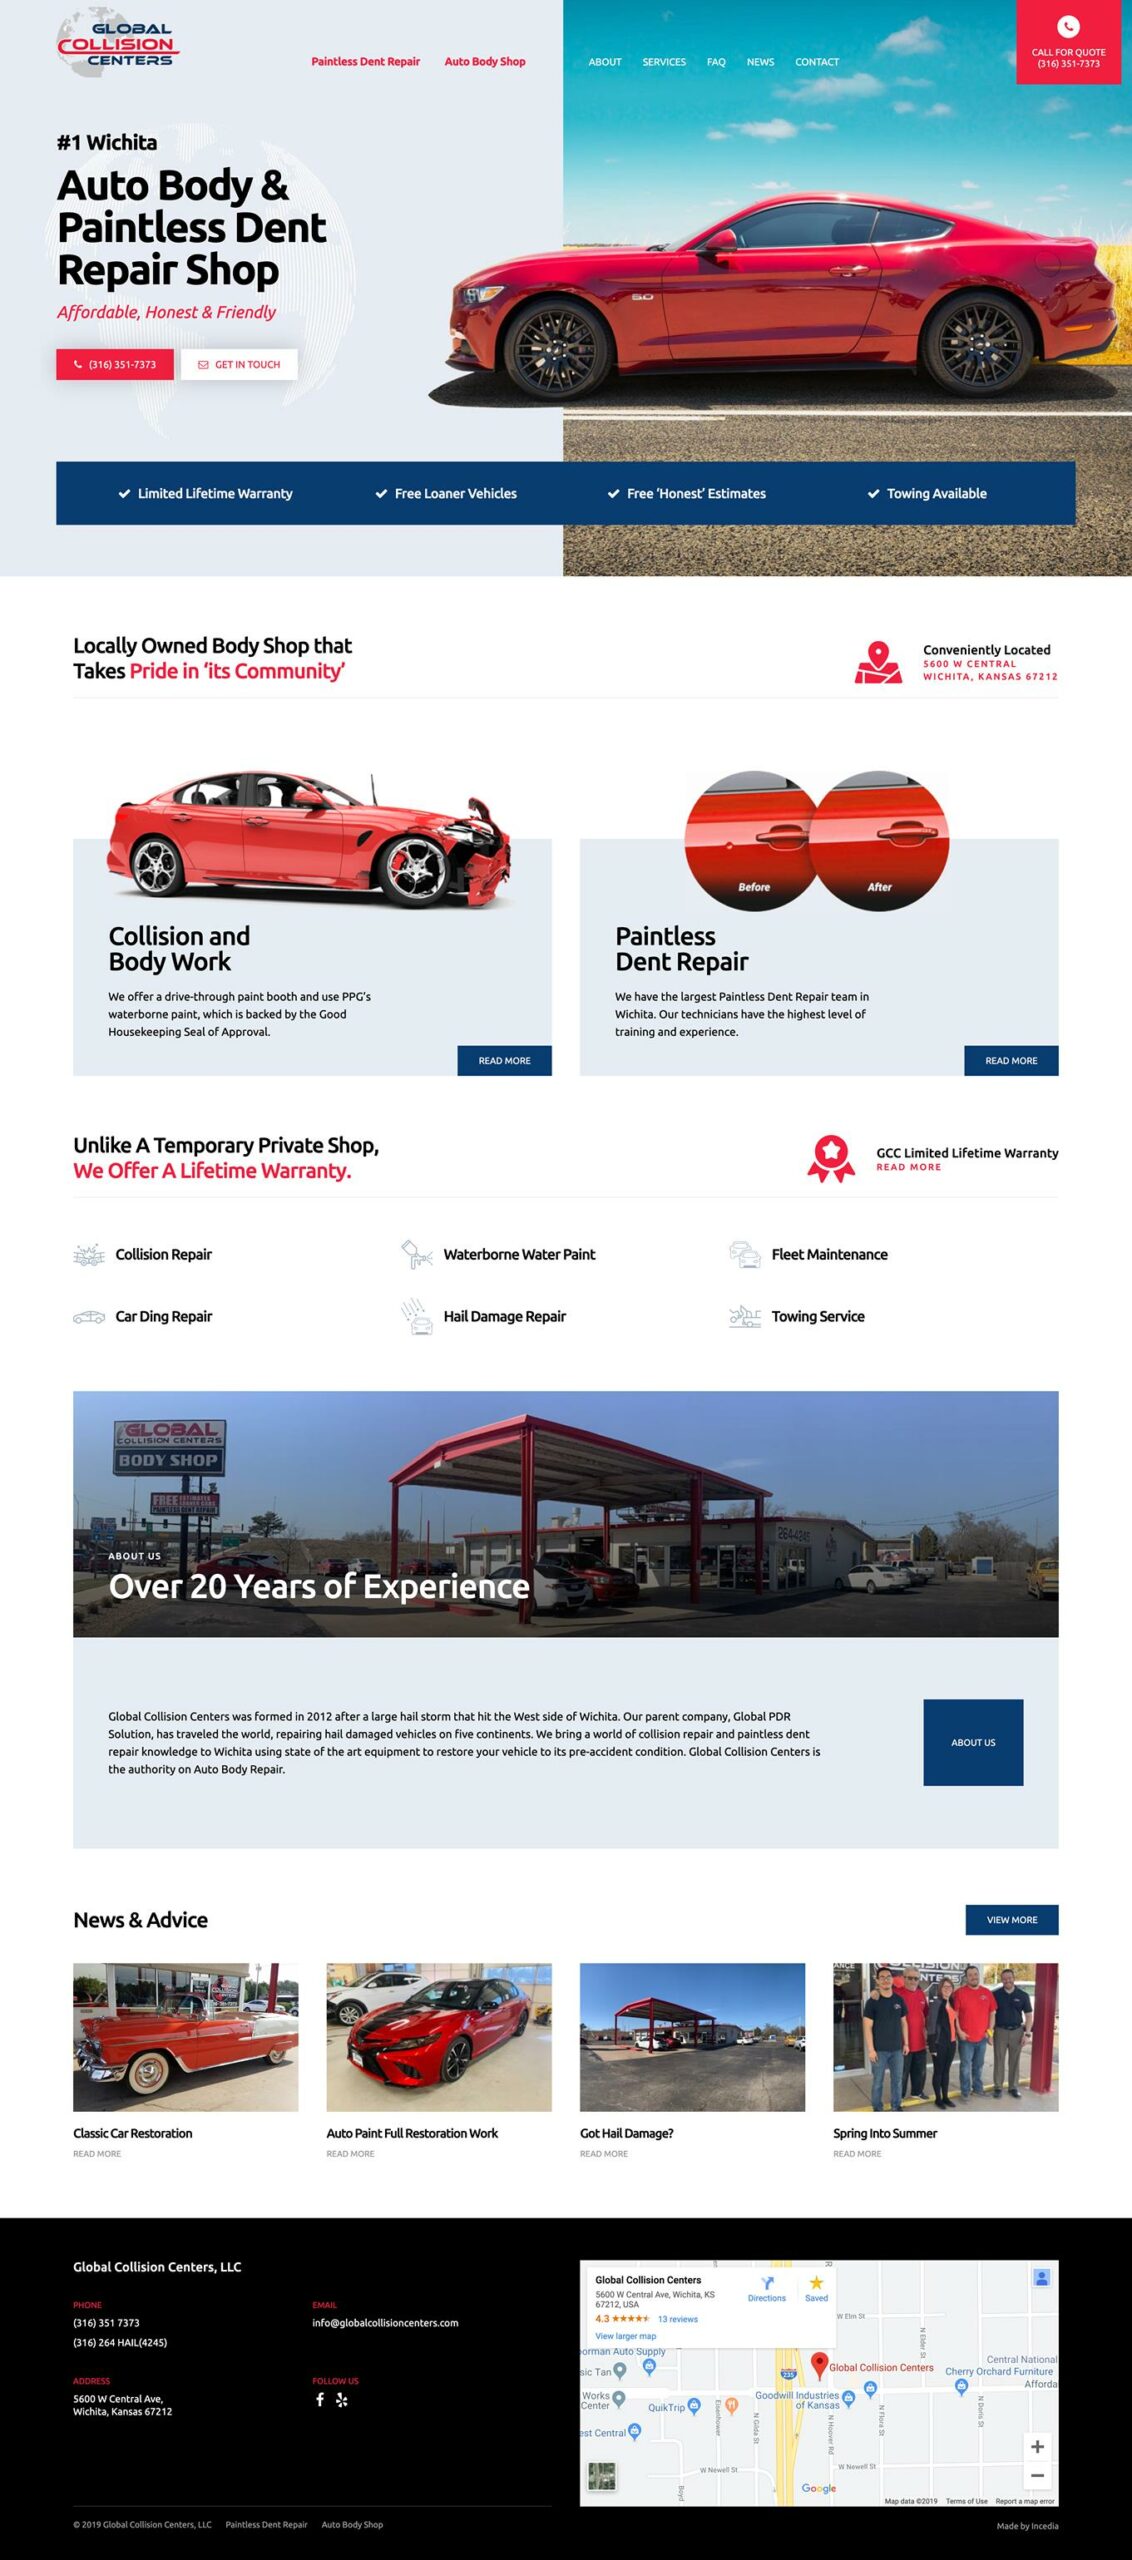 Web Redesign For An Auto Body Shop in Wichita